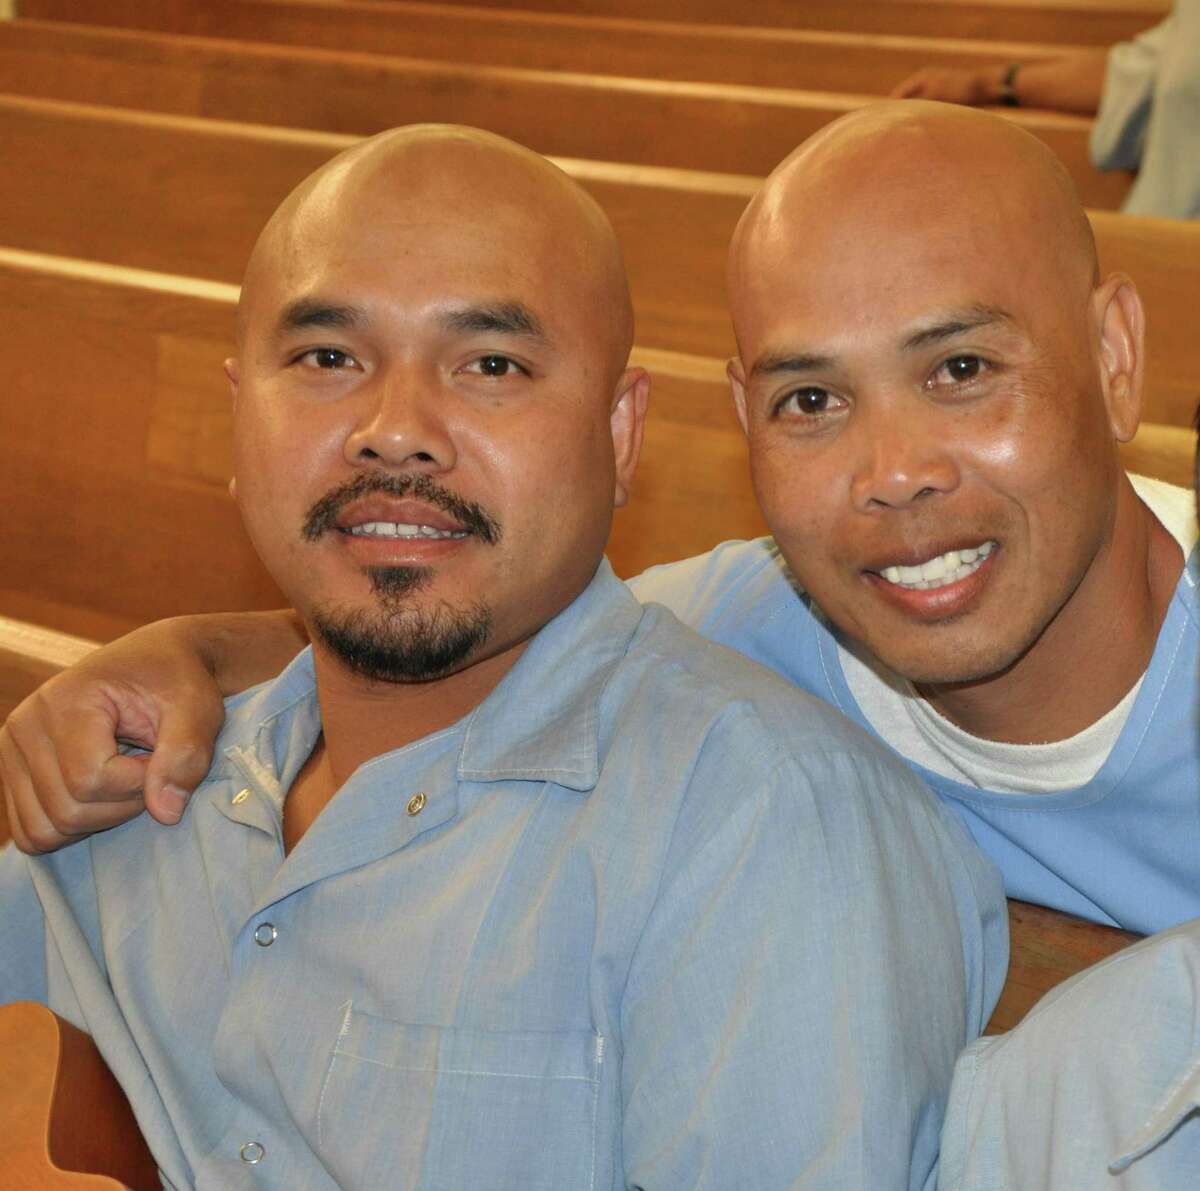 Phoeun You (right) has changed his life in the quarter century he has spent in prison for a fatal shooting, becoming a mentor and role model to people including Chanthon Bun (left). You was granted parole last year and turned over to ICE. Supporters, including officials in Oakland, are calling for Gov. Gavin Newsom to pardon You to prevent his deportation. But time is running out.